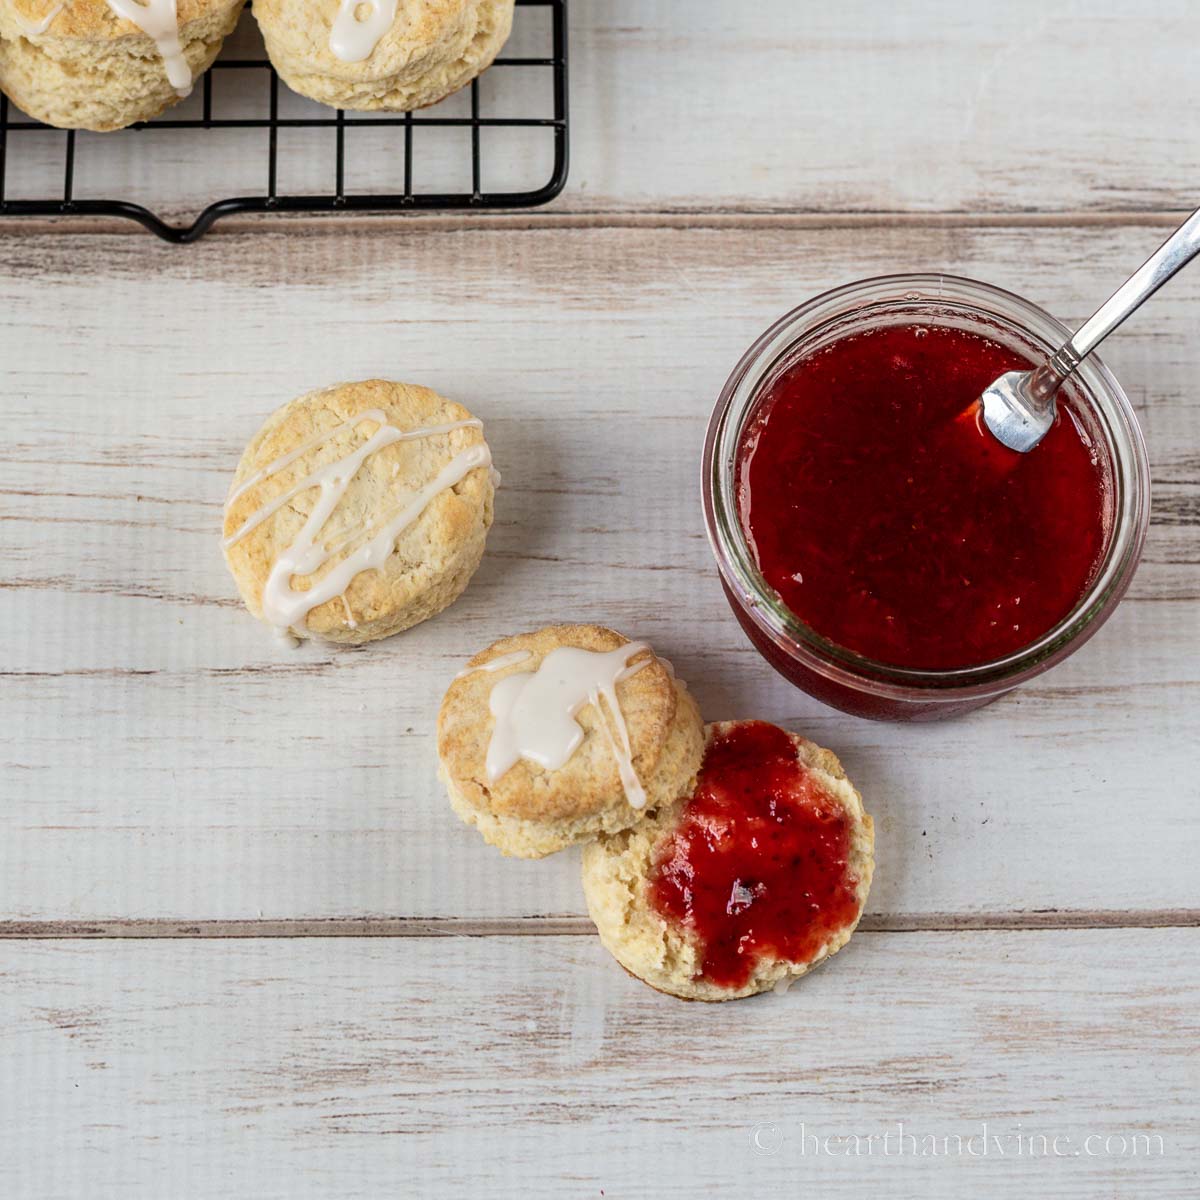 Simple scones with glaze and strawberry jam.